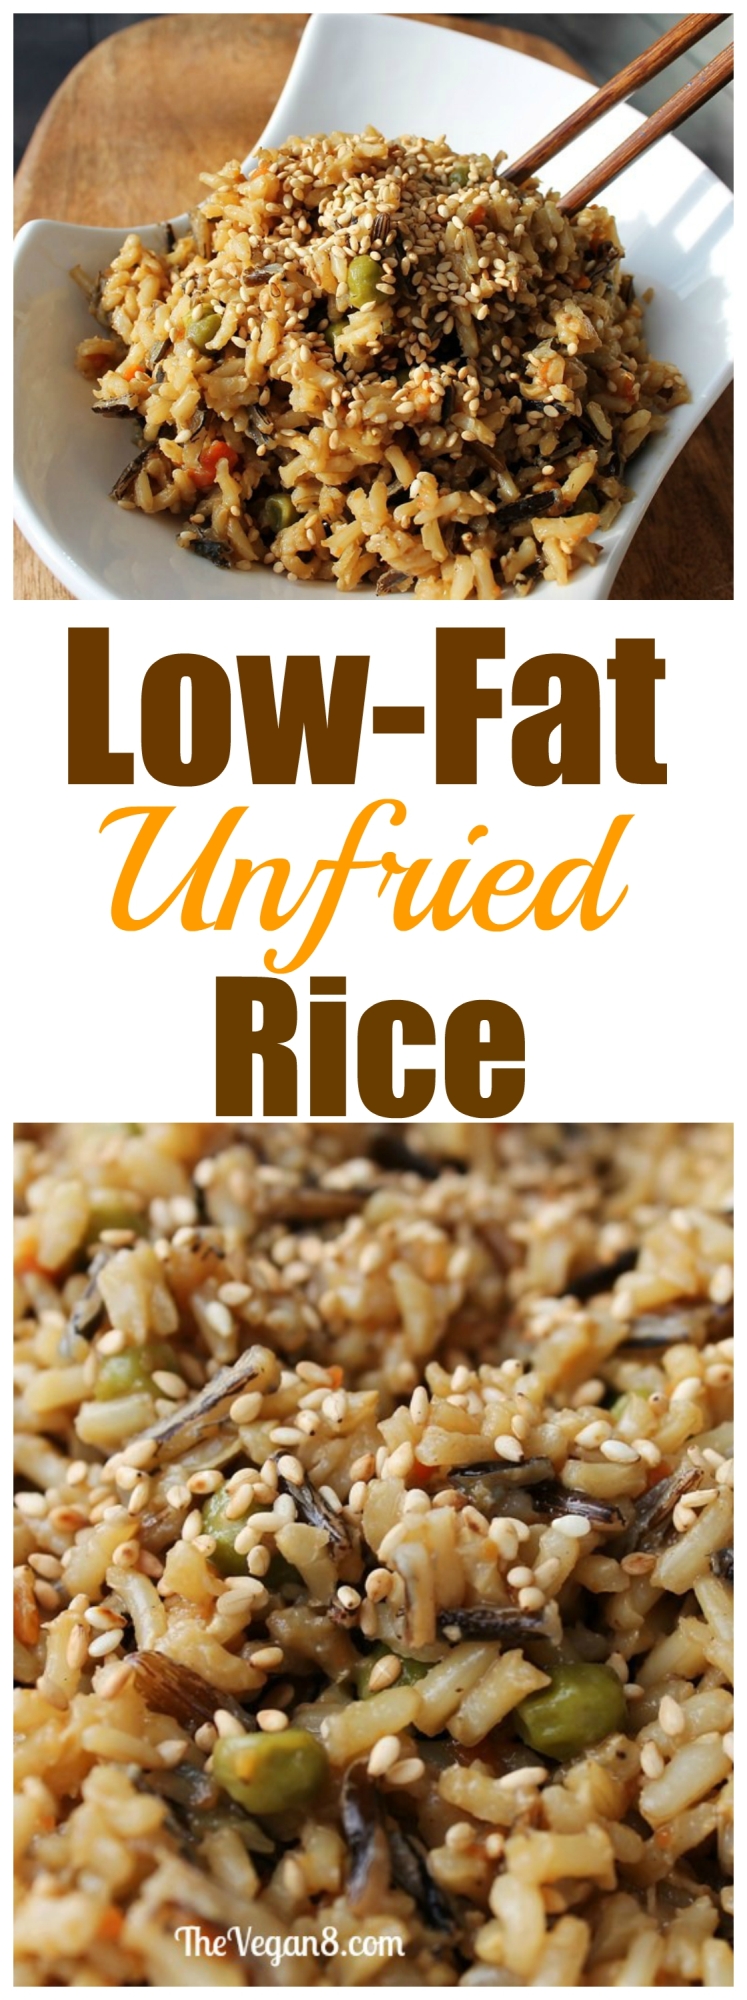 Fat Content In Rice 86